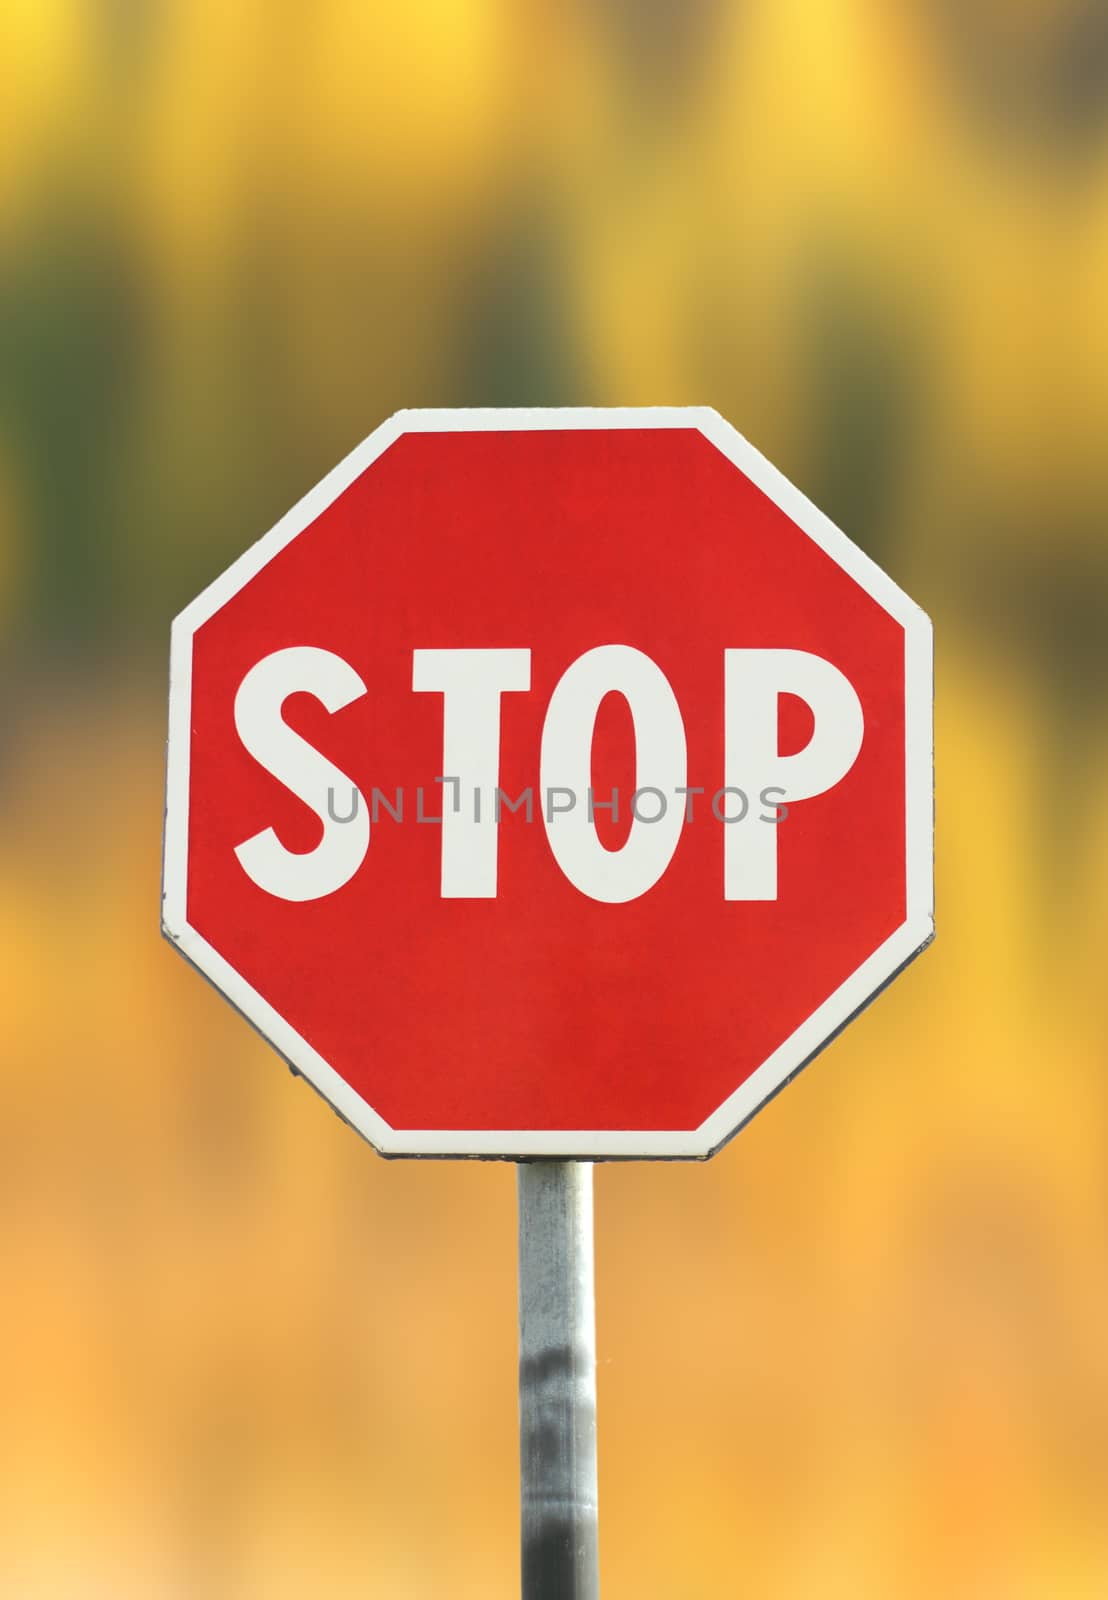 stop sign over autumn background by taviphoto